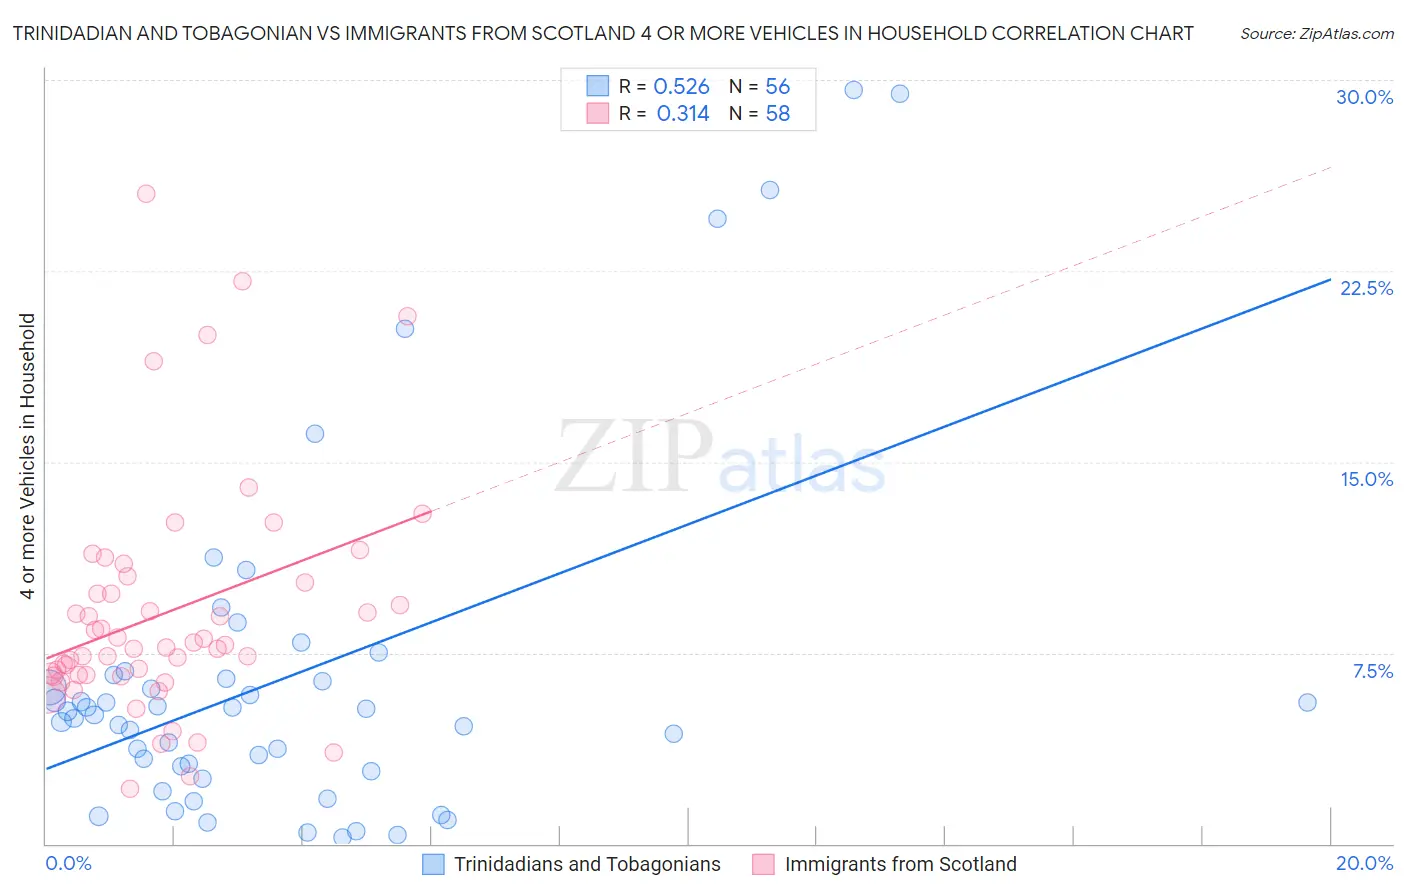 Trinidadian and Tobagonian vs Immigrants from Scotland 4 or more Vehicles in Household